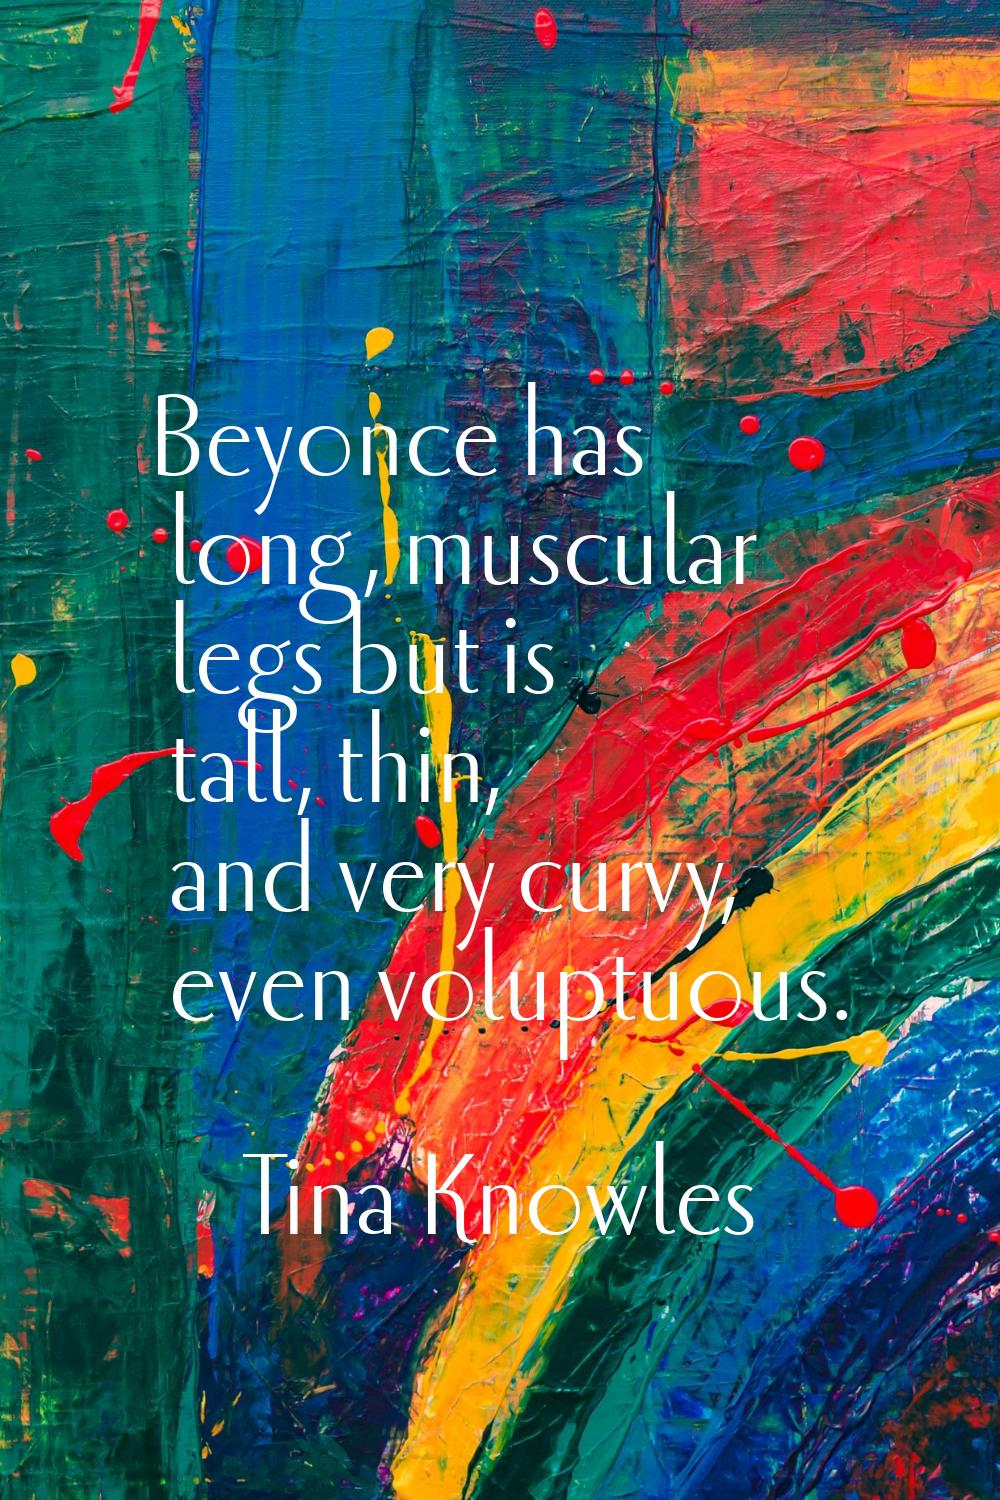 Beyonce has long, muscular legs but is tall, thin, and very curvy, even voluptuous.